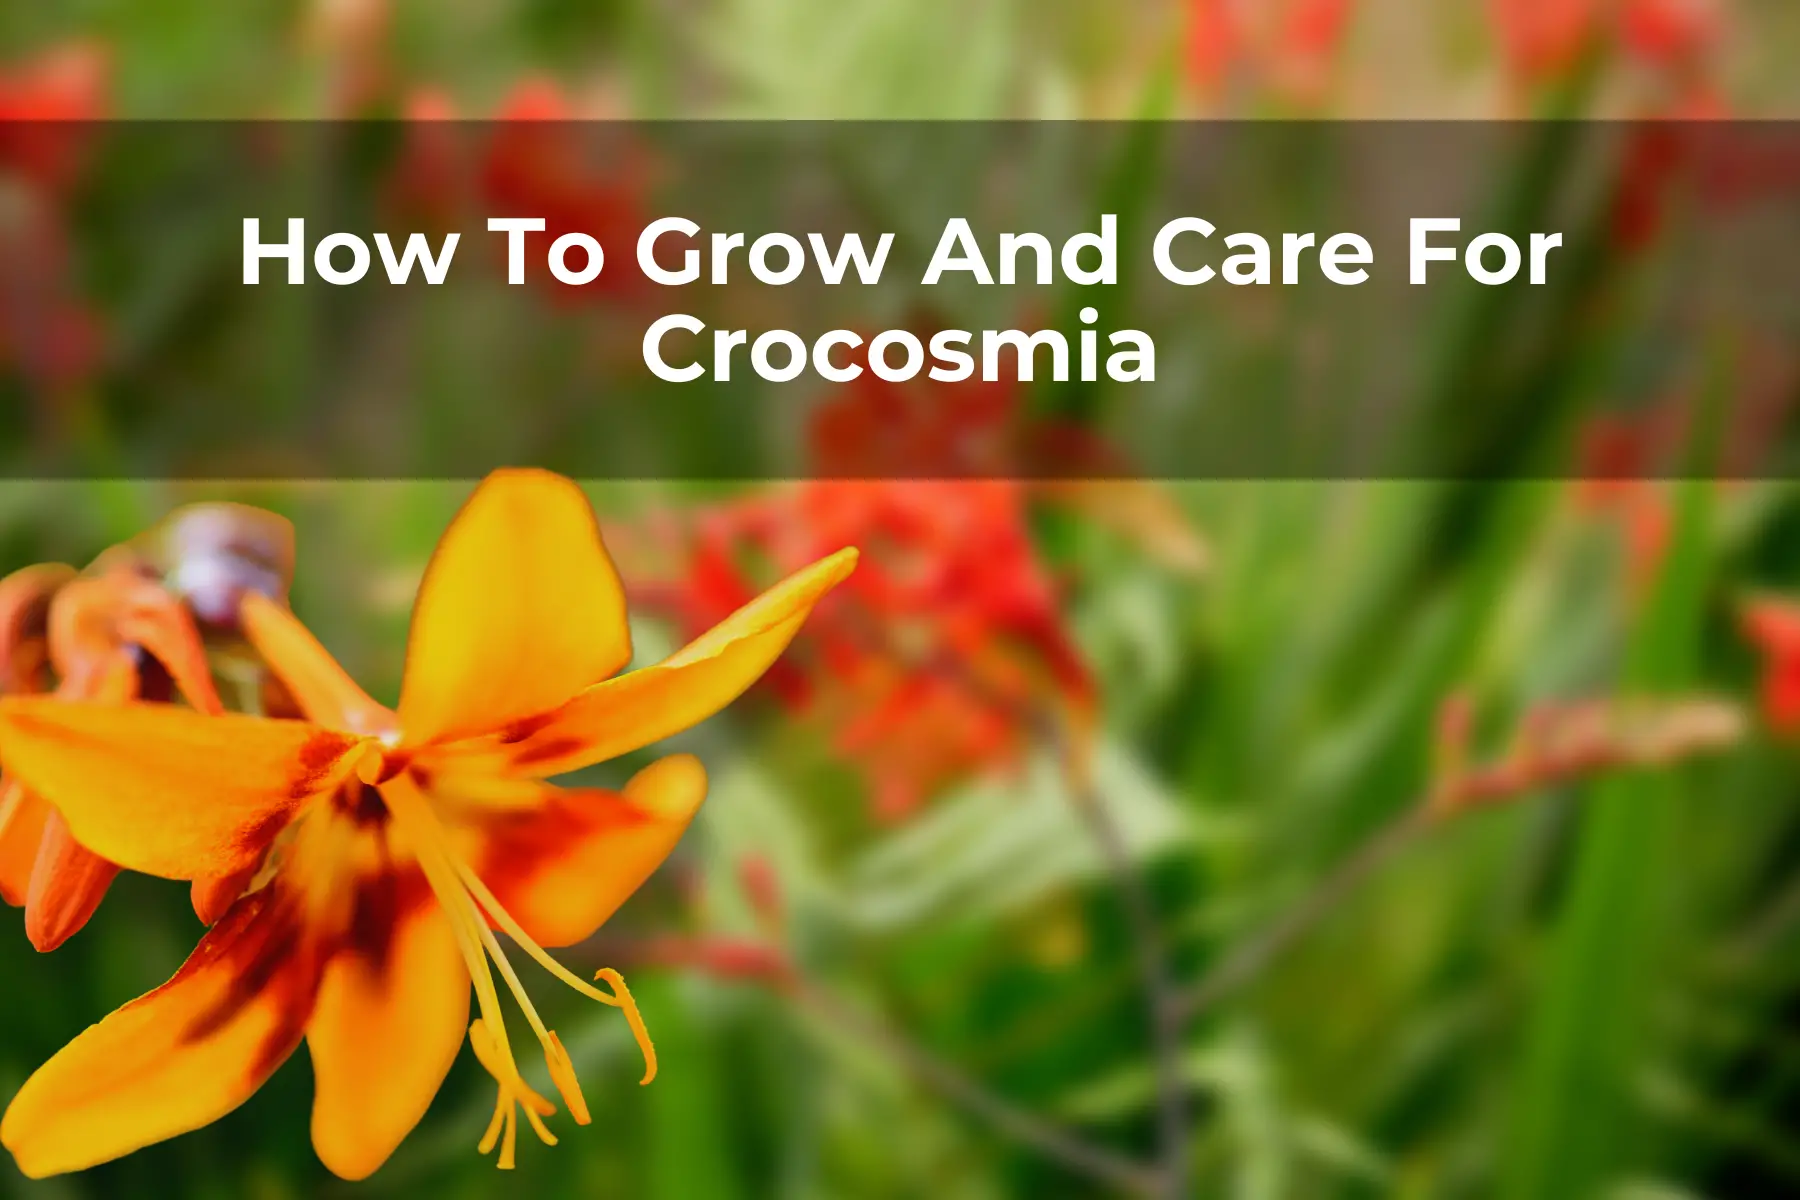 How To Grow And Care For Crocosmia